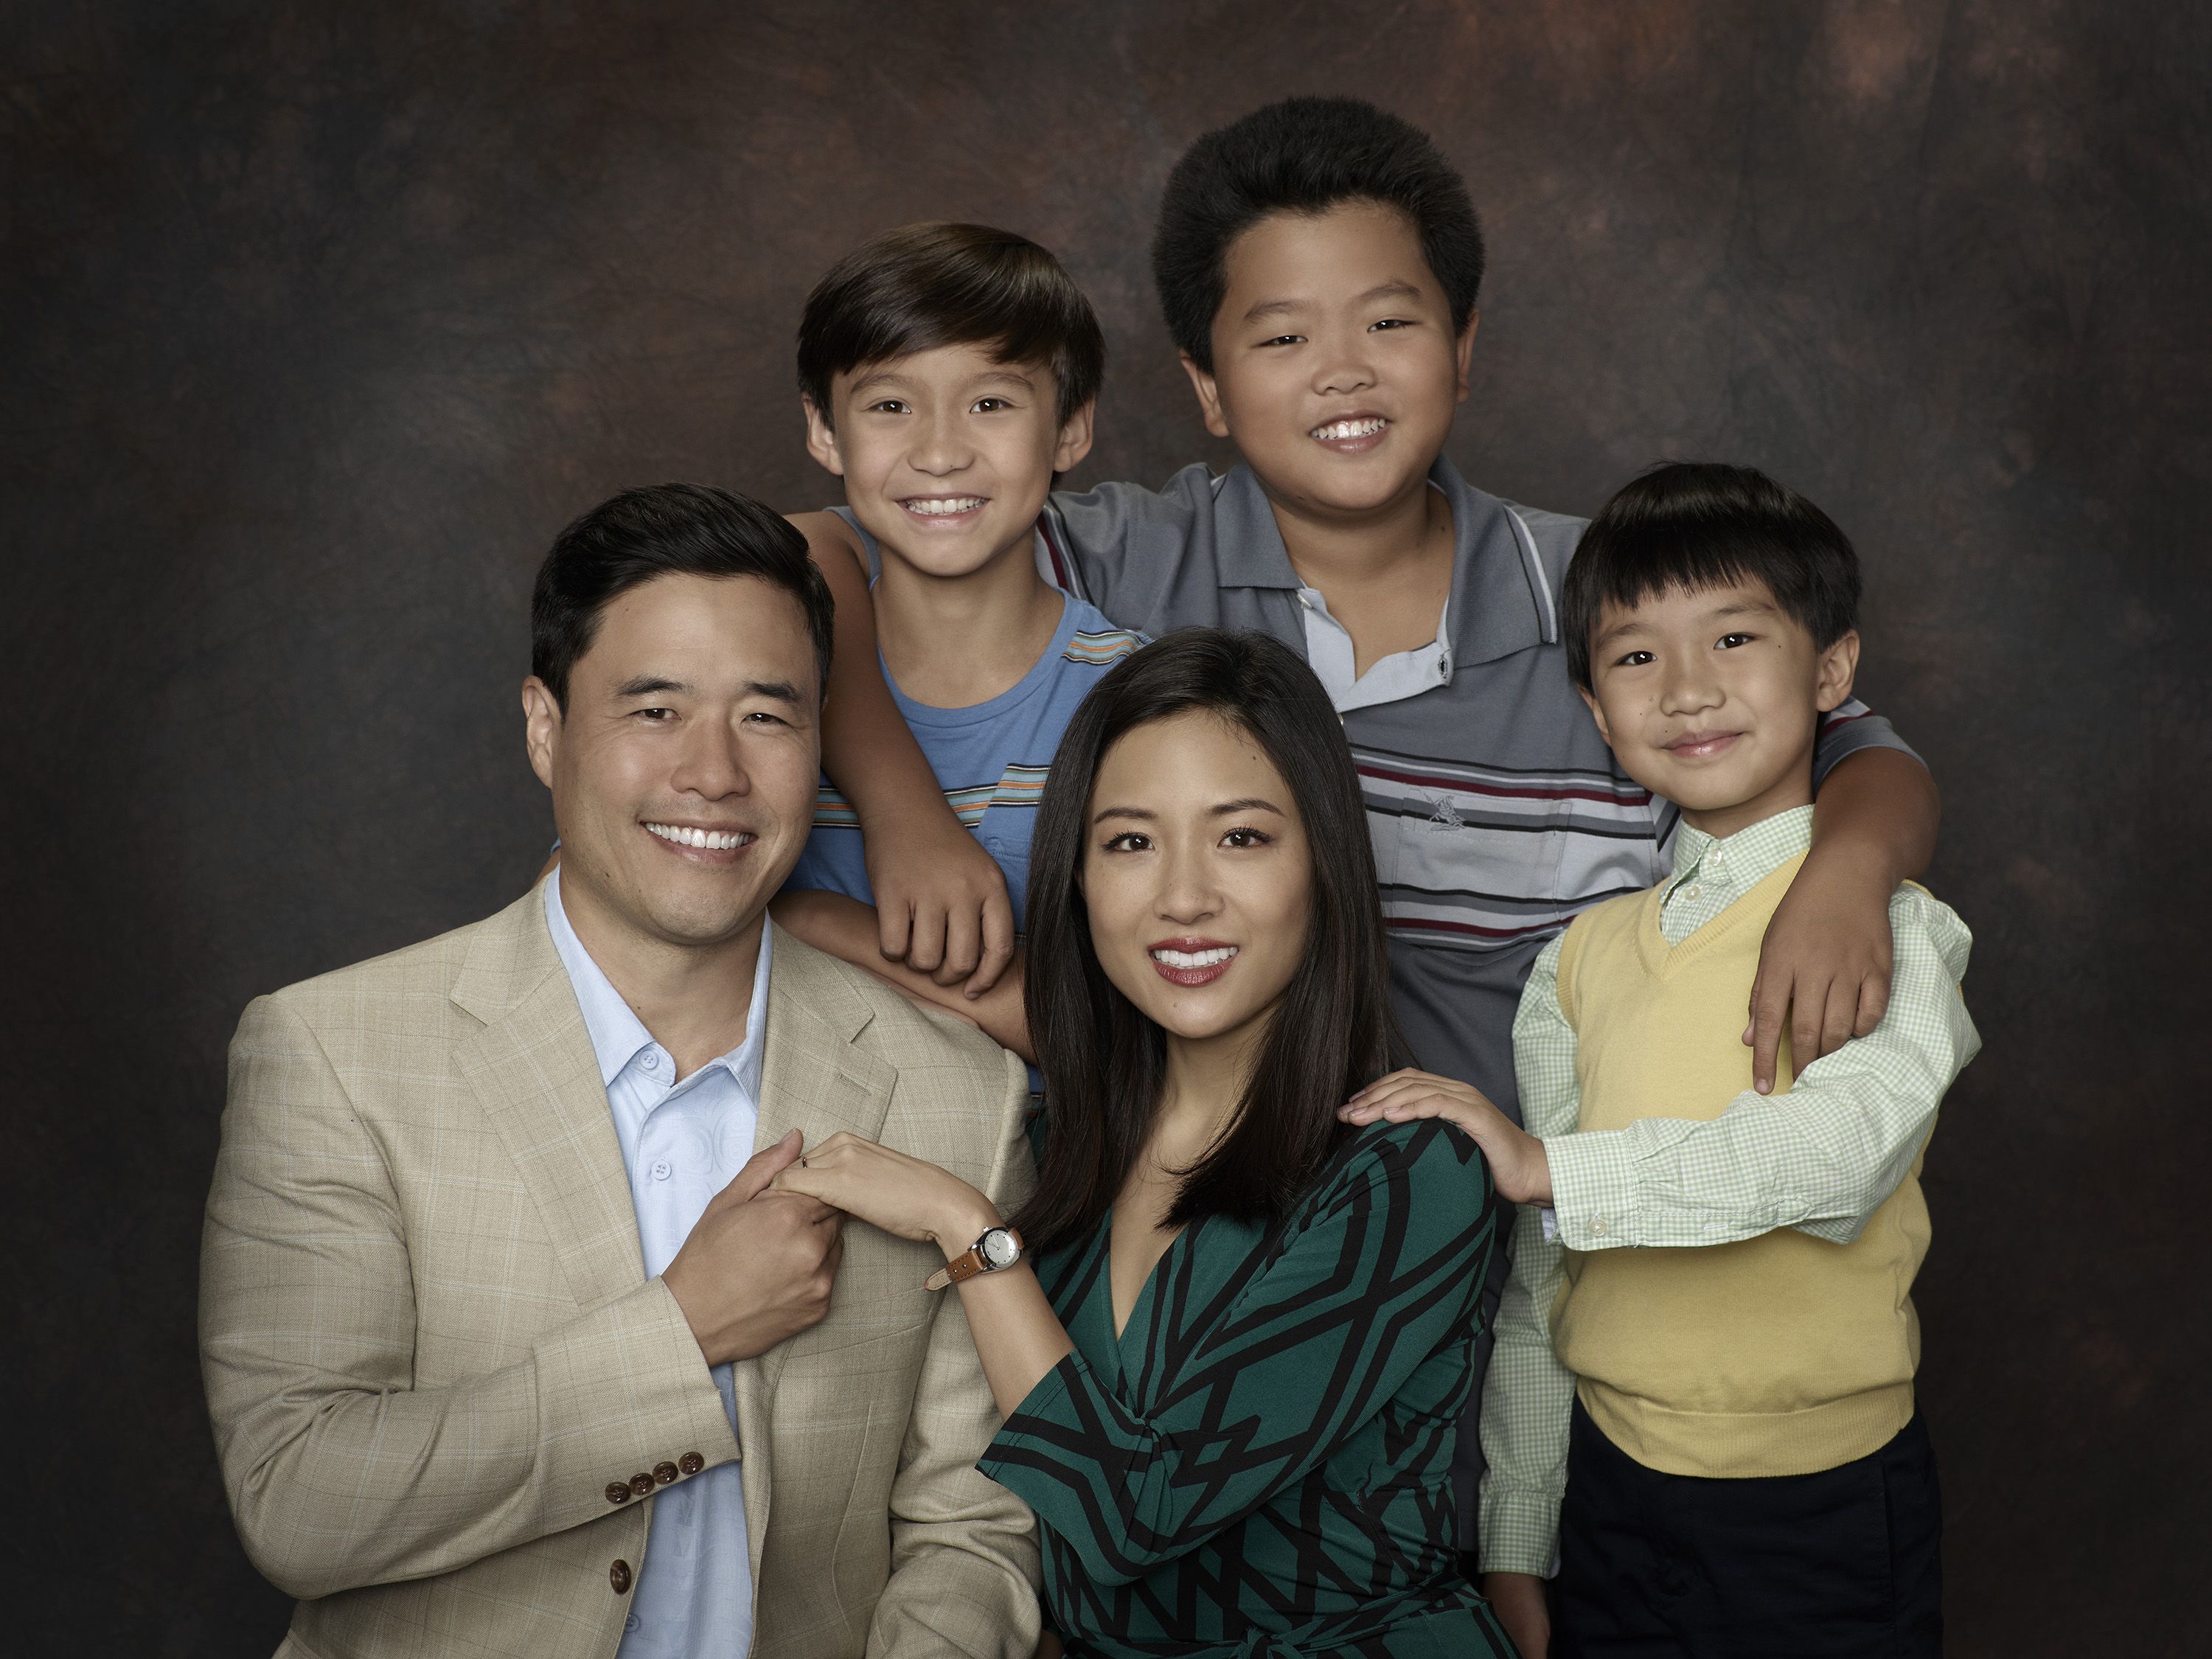 A bumpy maiden voyage for 'Fresh Off the Boat' - Los Angeles Times